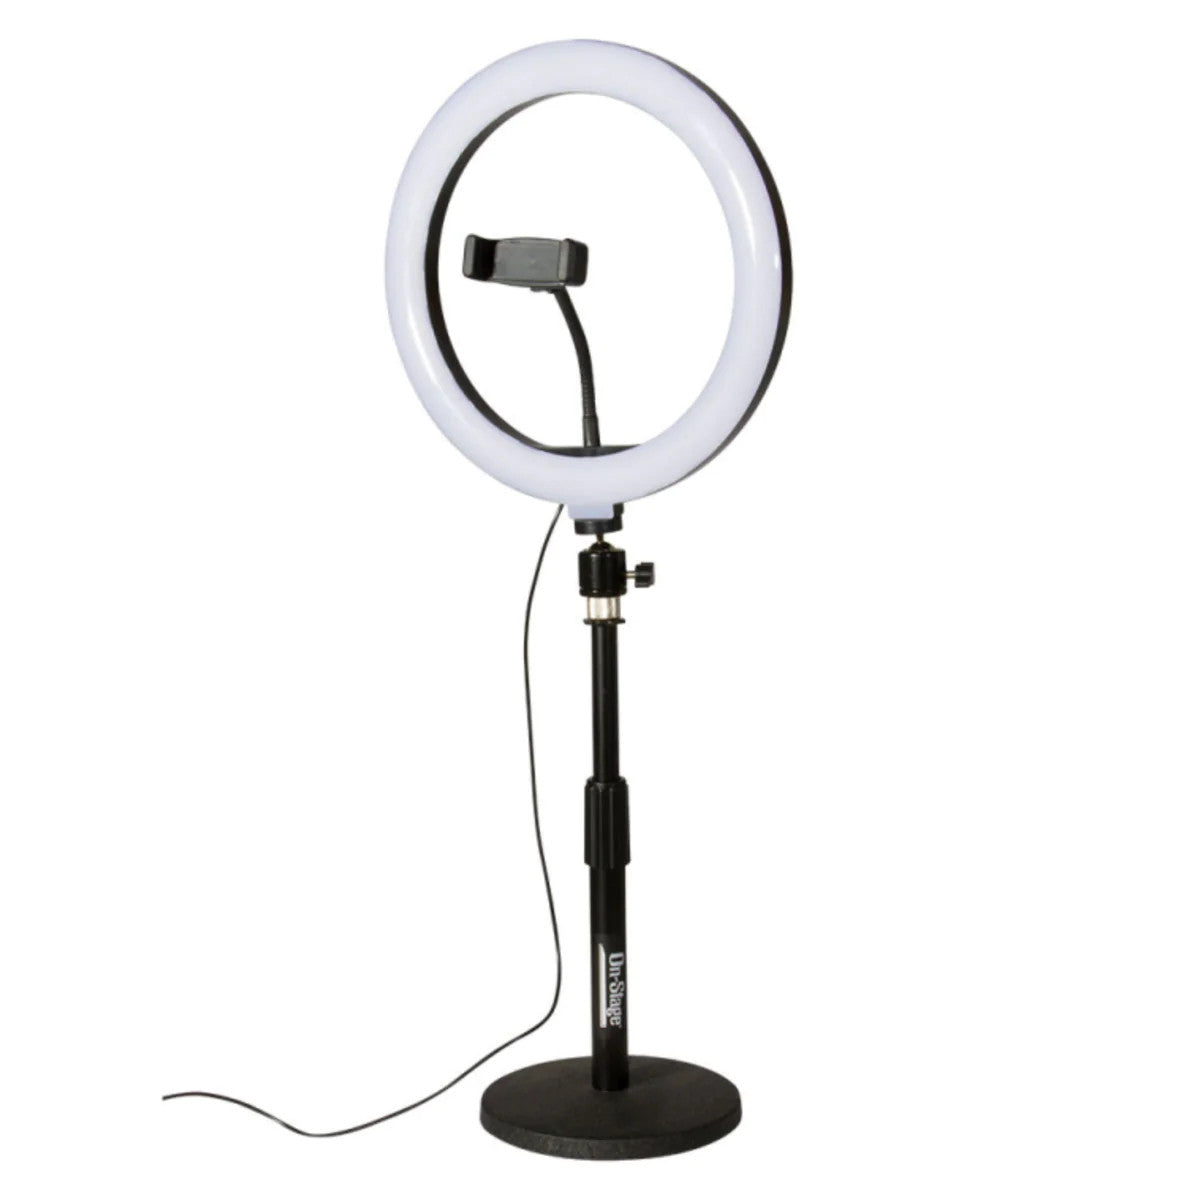 On Stage 10" LED Ring Light Kit with 2 Stands